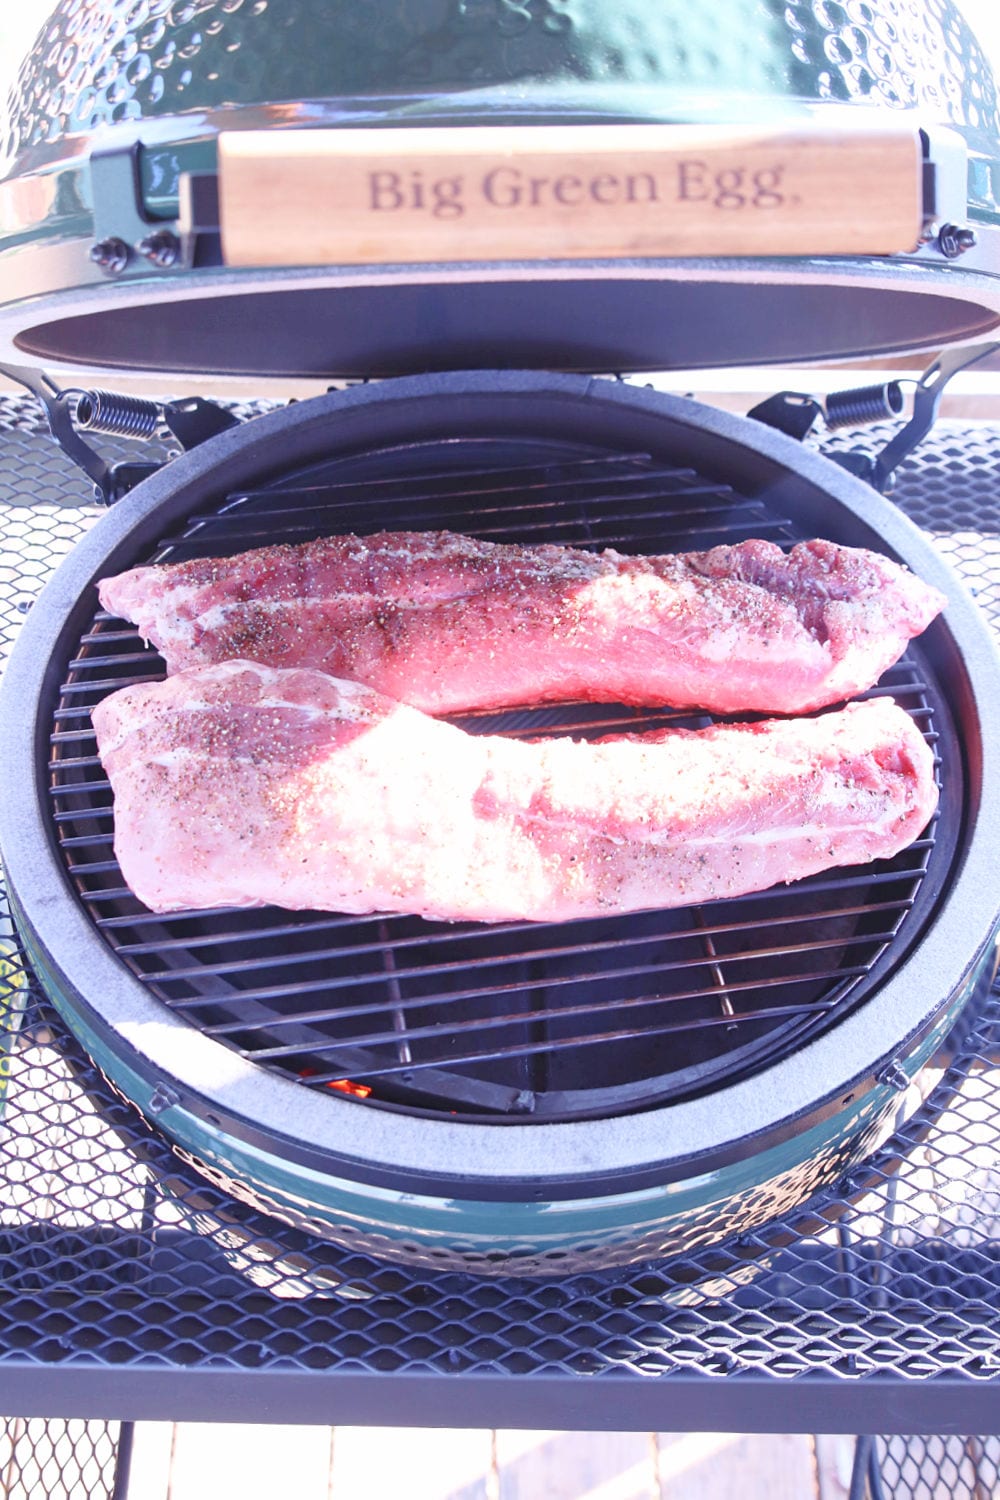 Big Green Egg Grill with 2 racks of baby back ribs